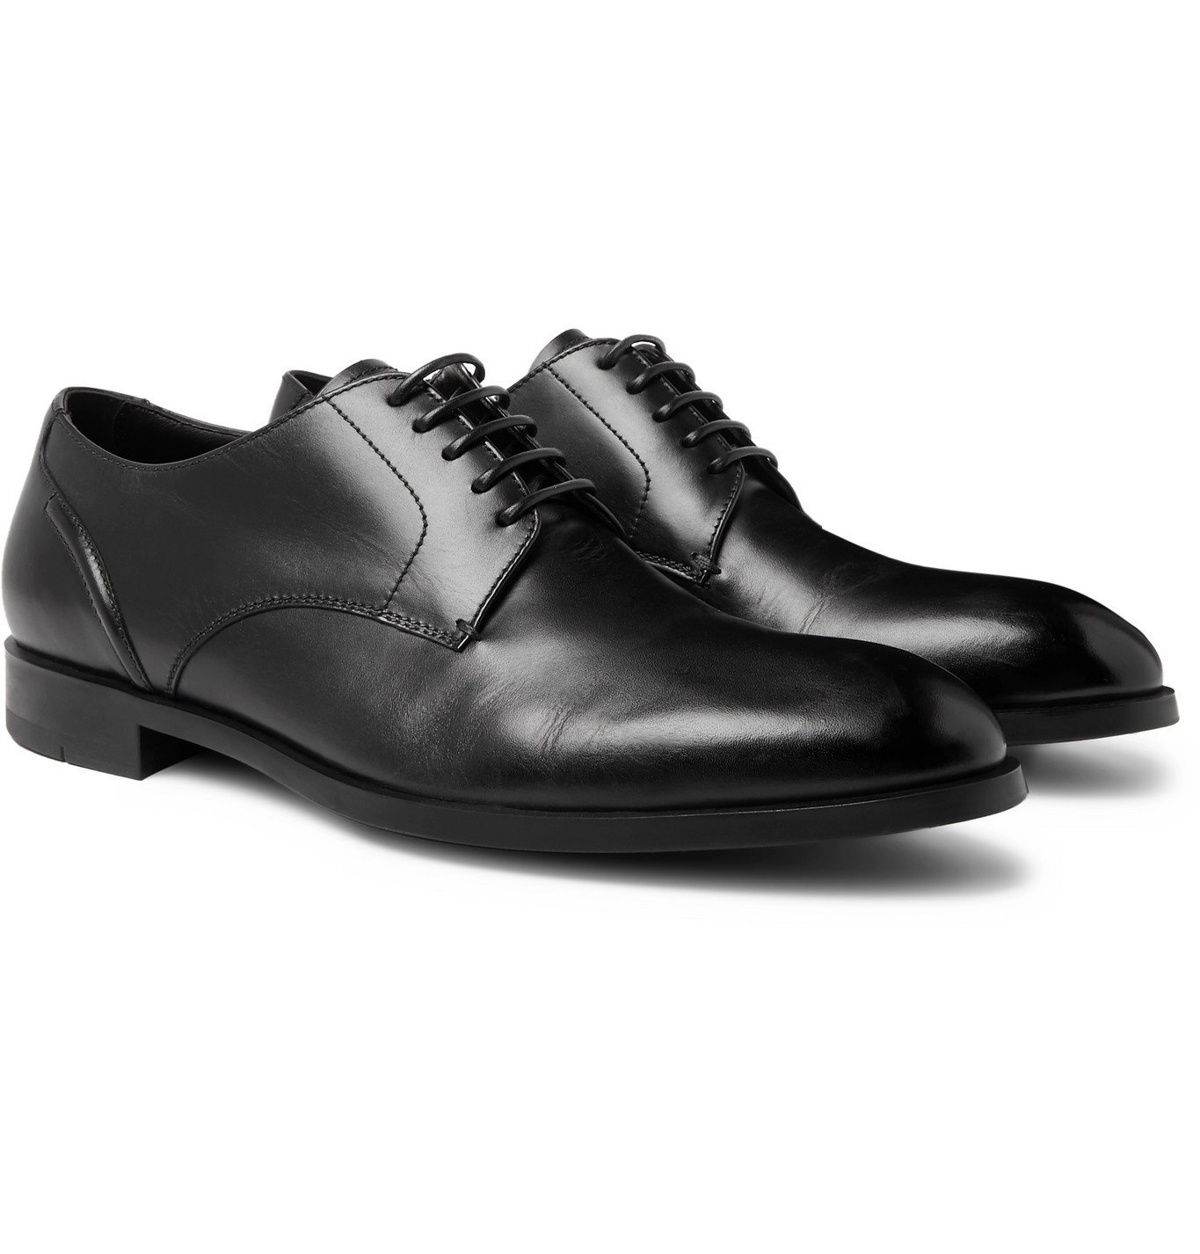 Zegna Vienna leather Oxford shoes - Black